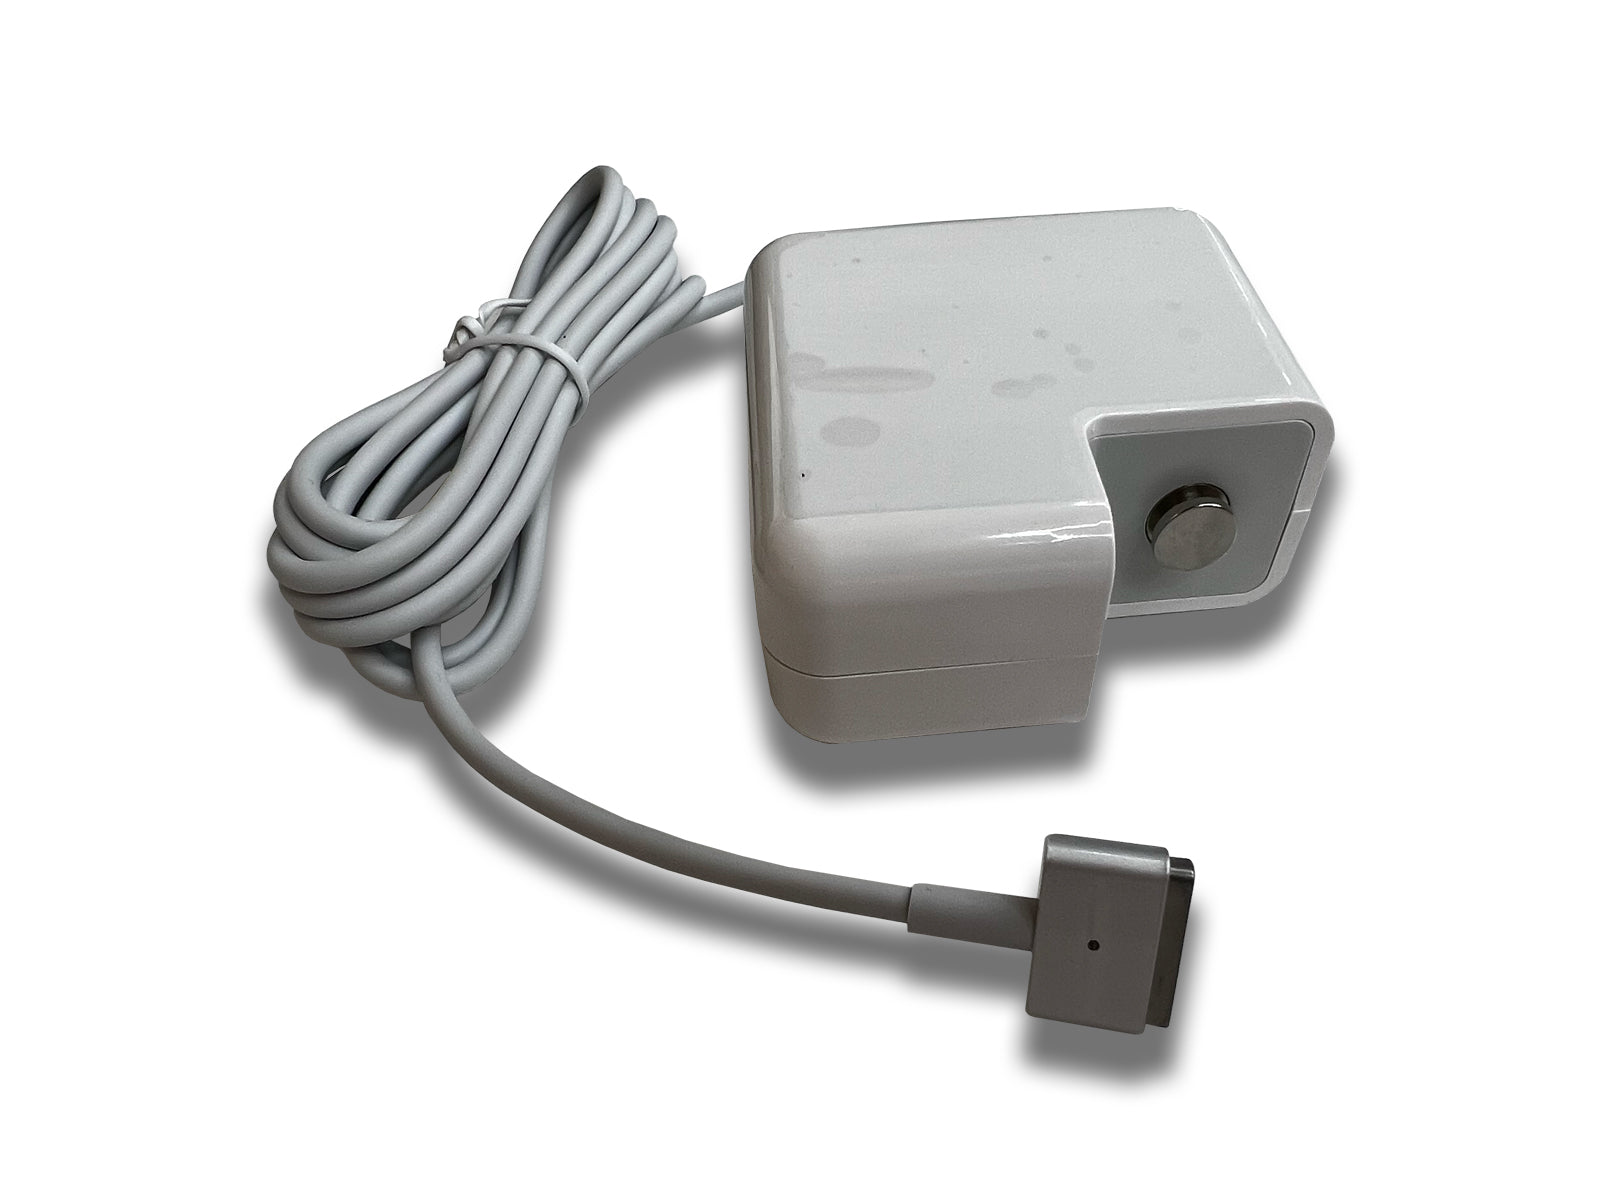 MacBook Charger Without Plug